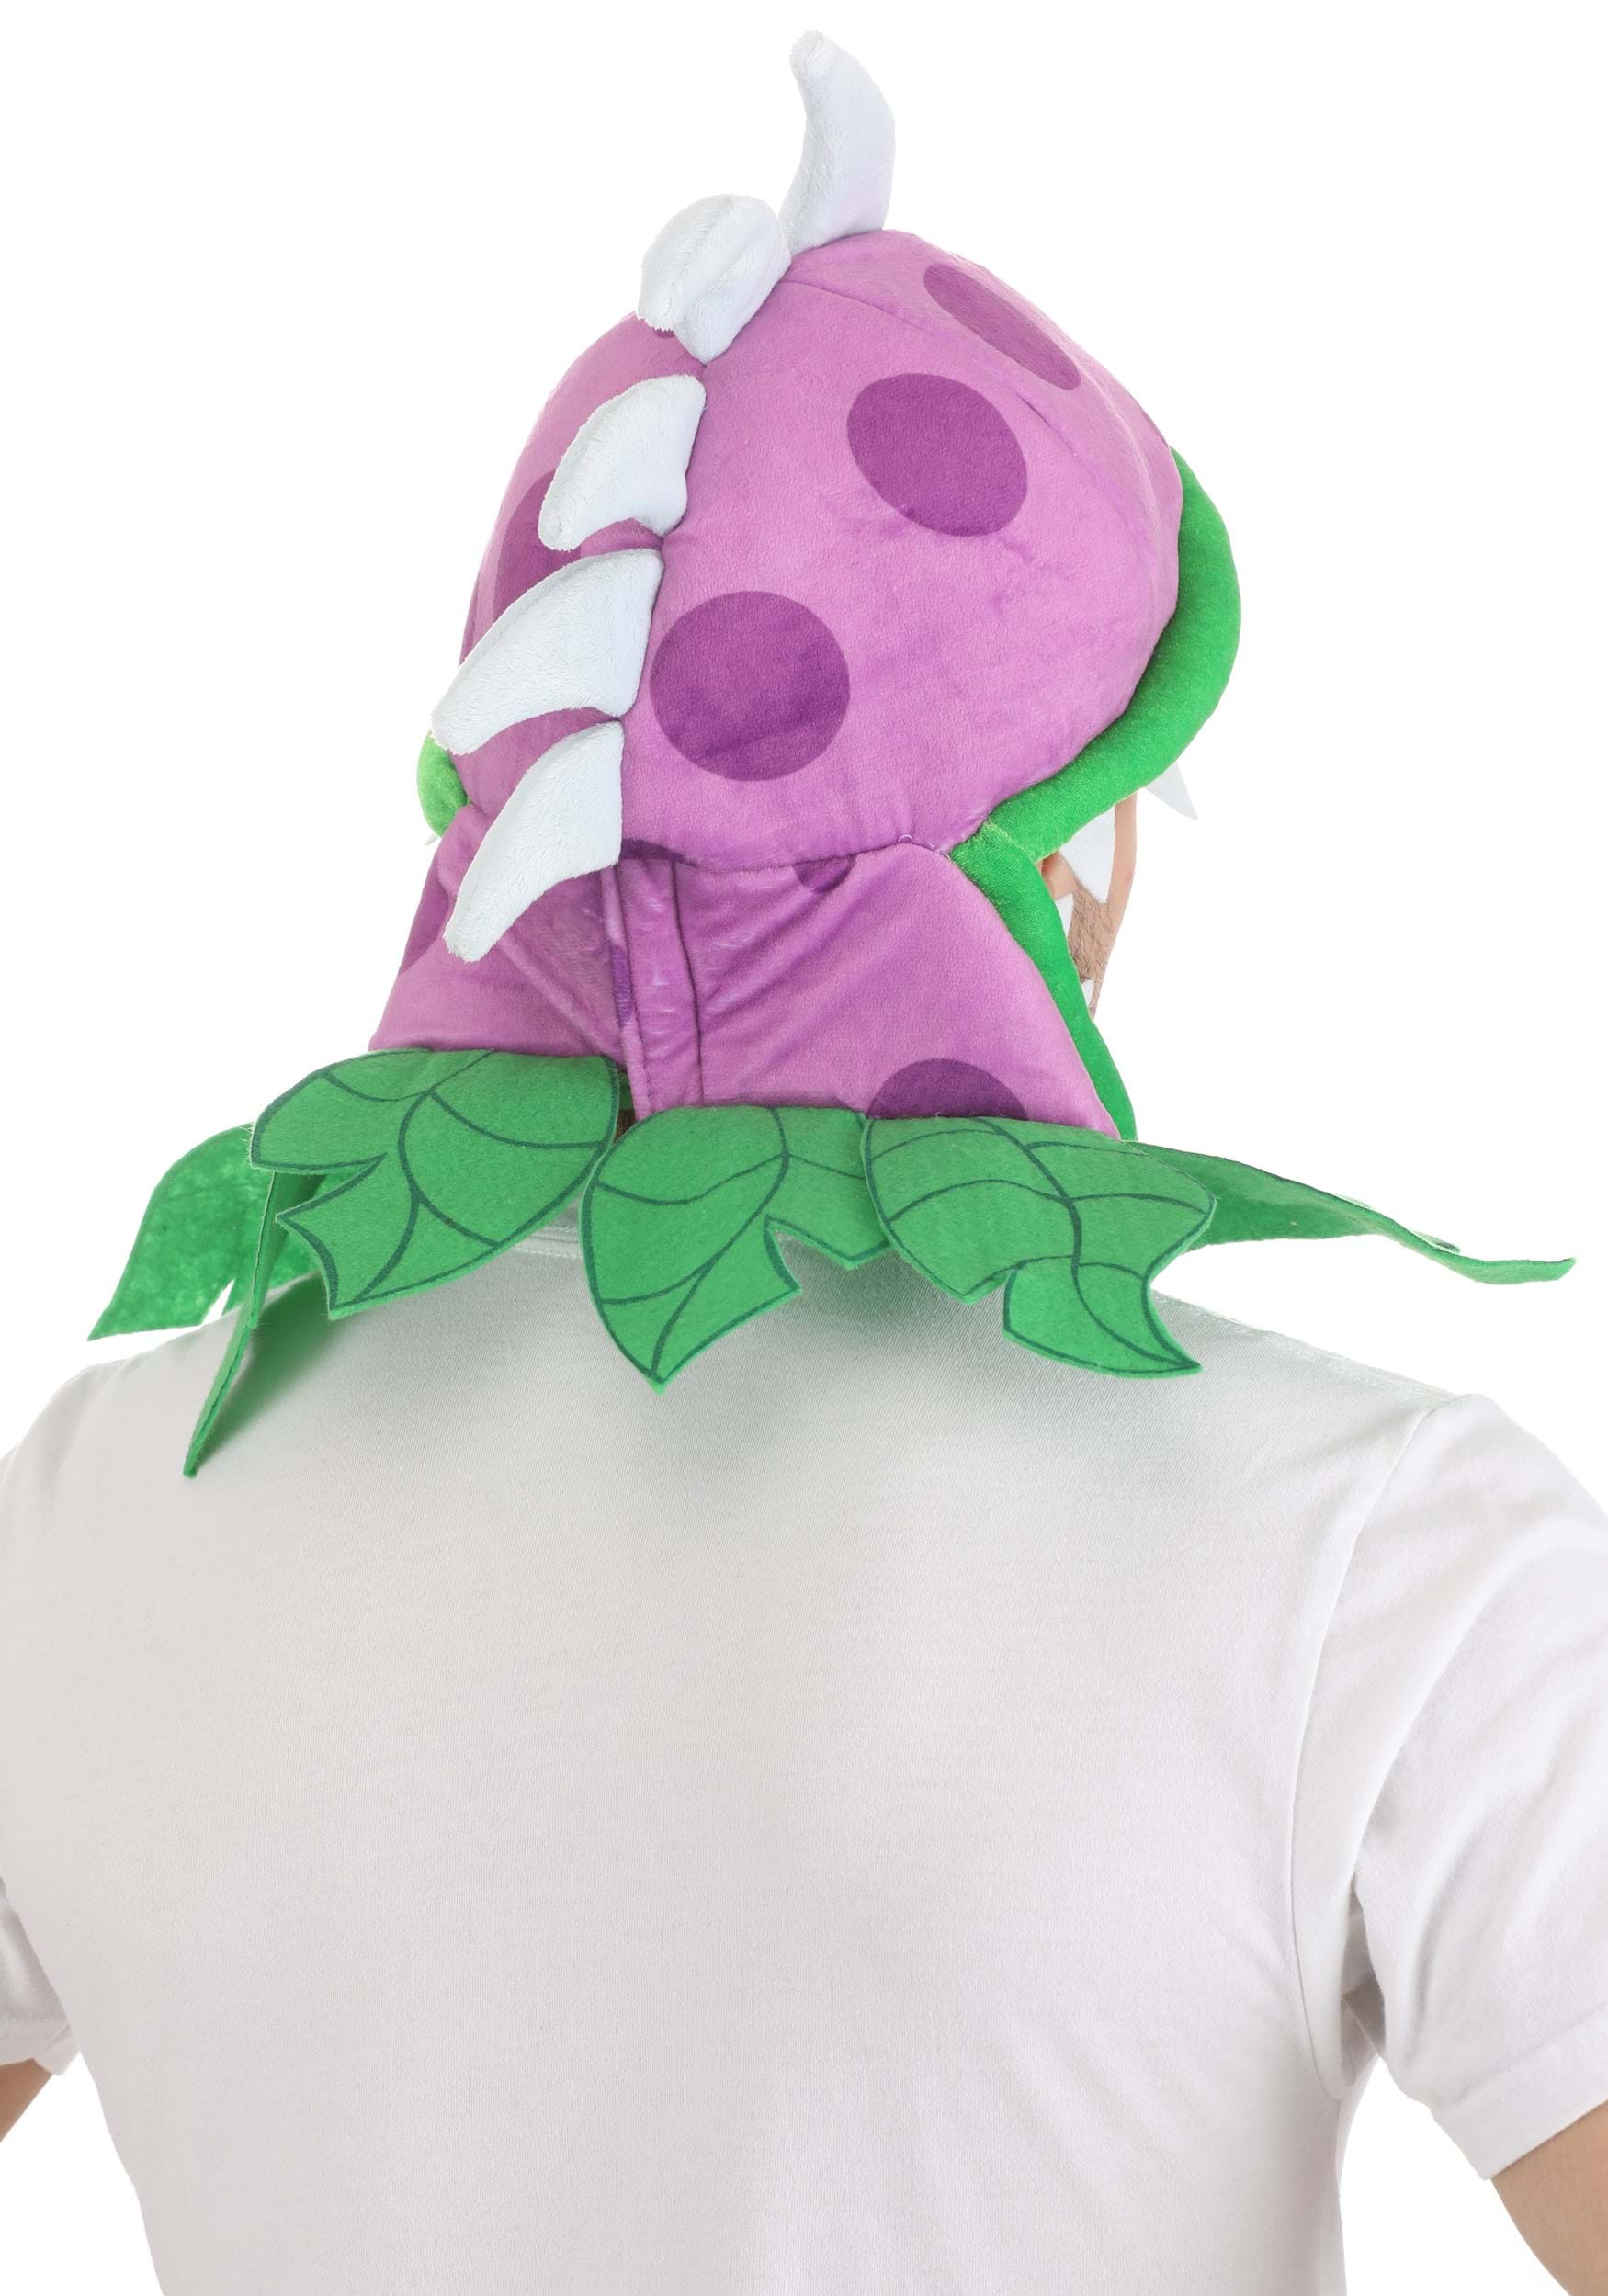 Plants Vs Zombies Chomper Costume Jawesome Hat